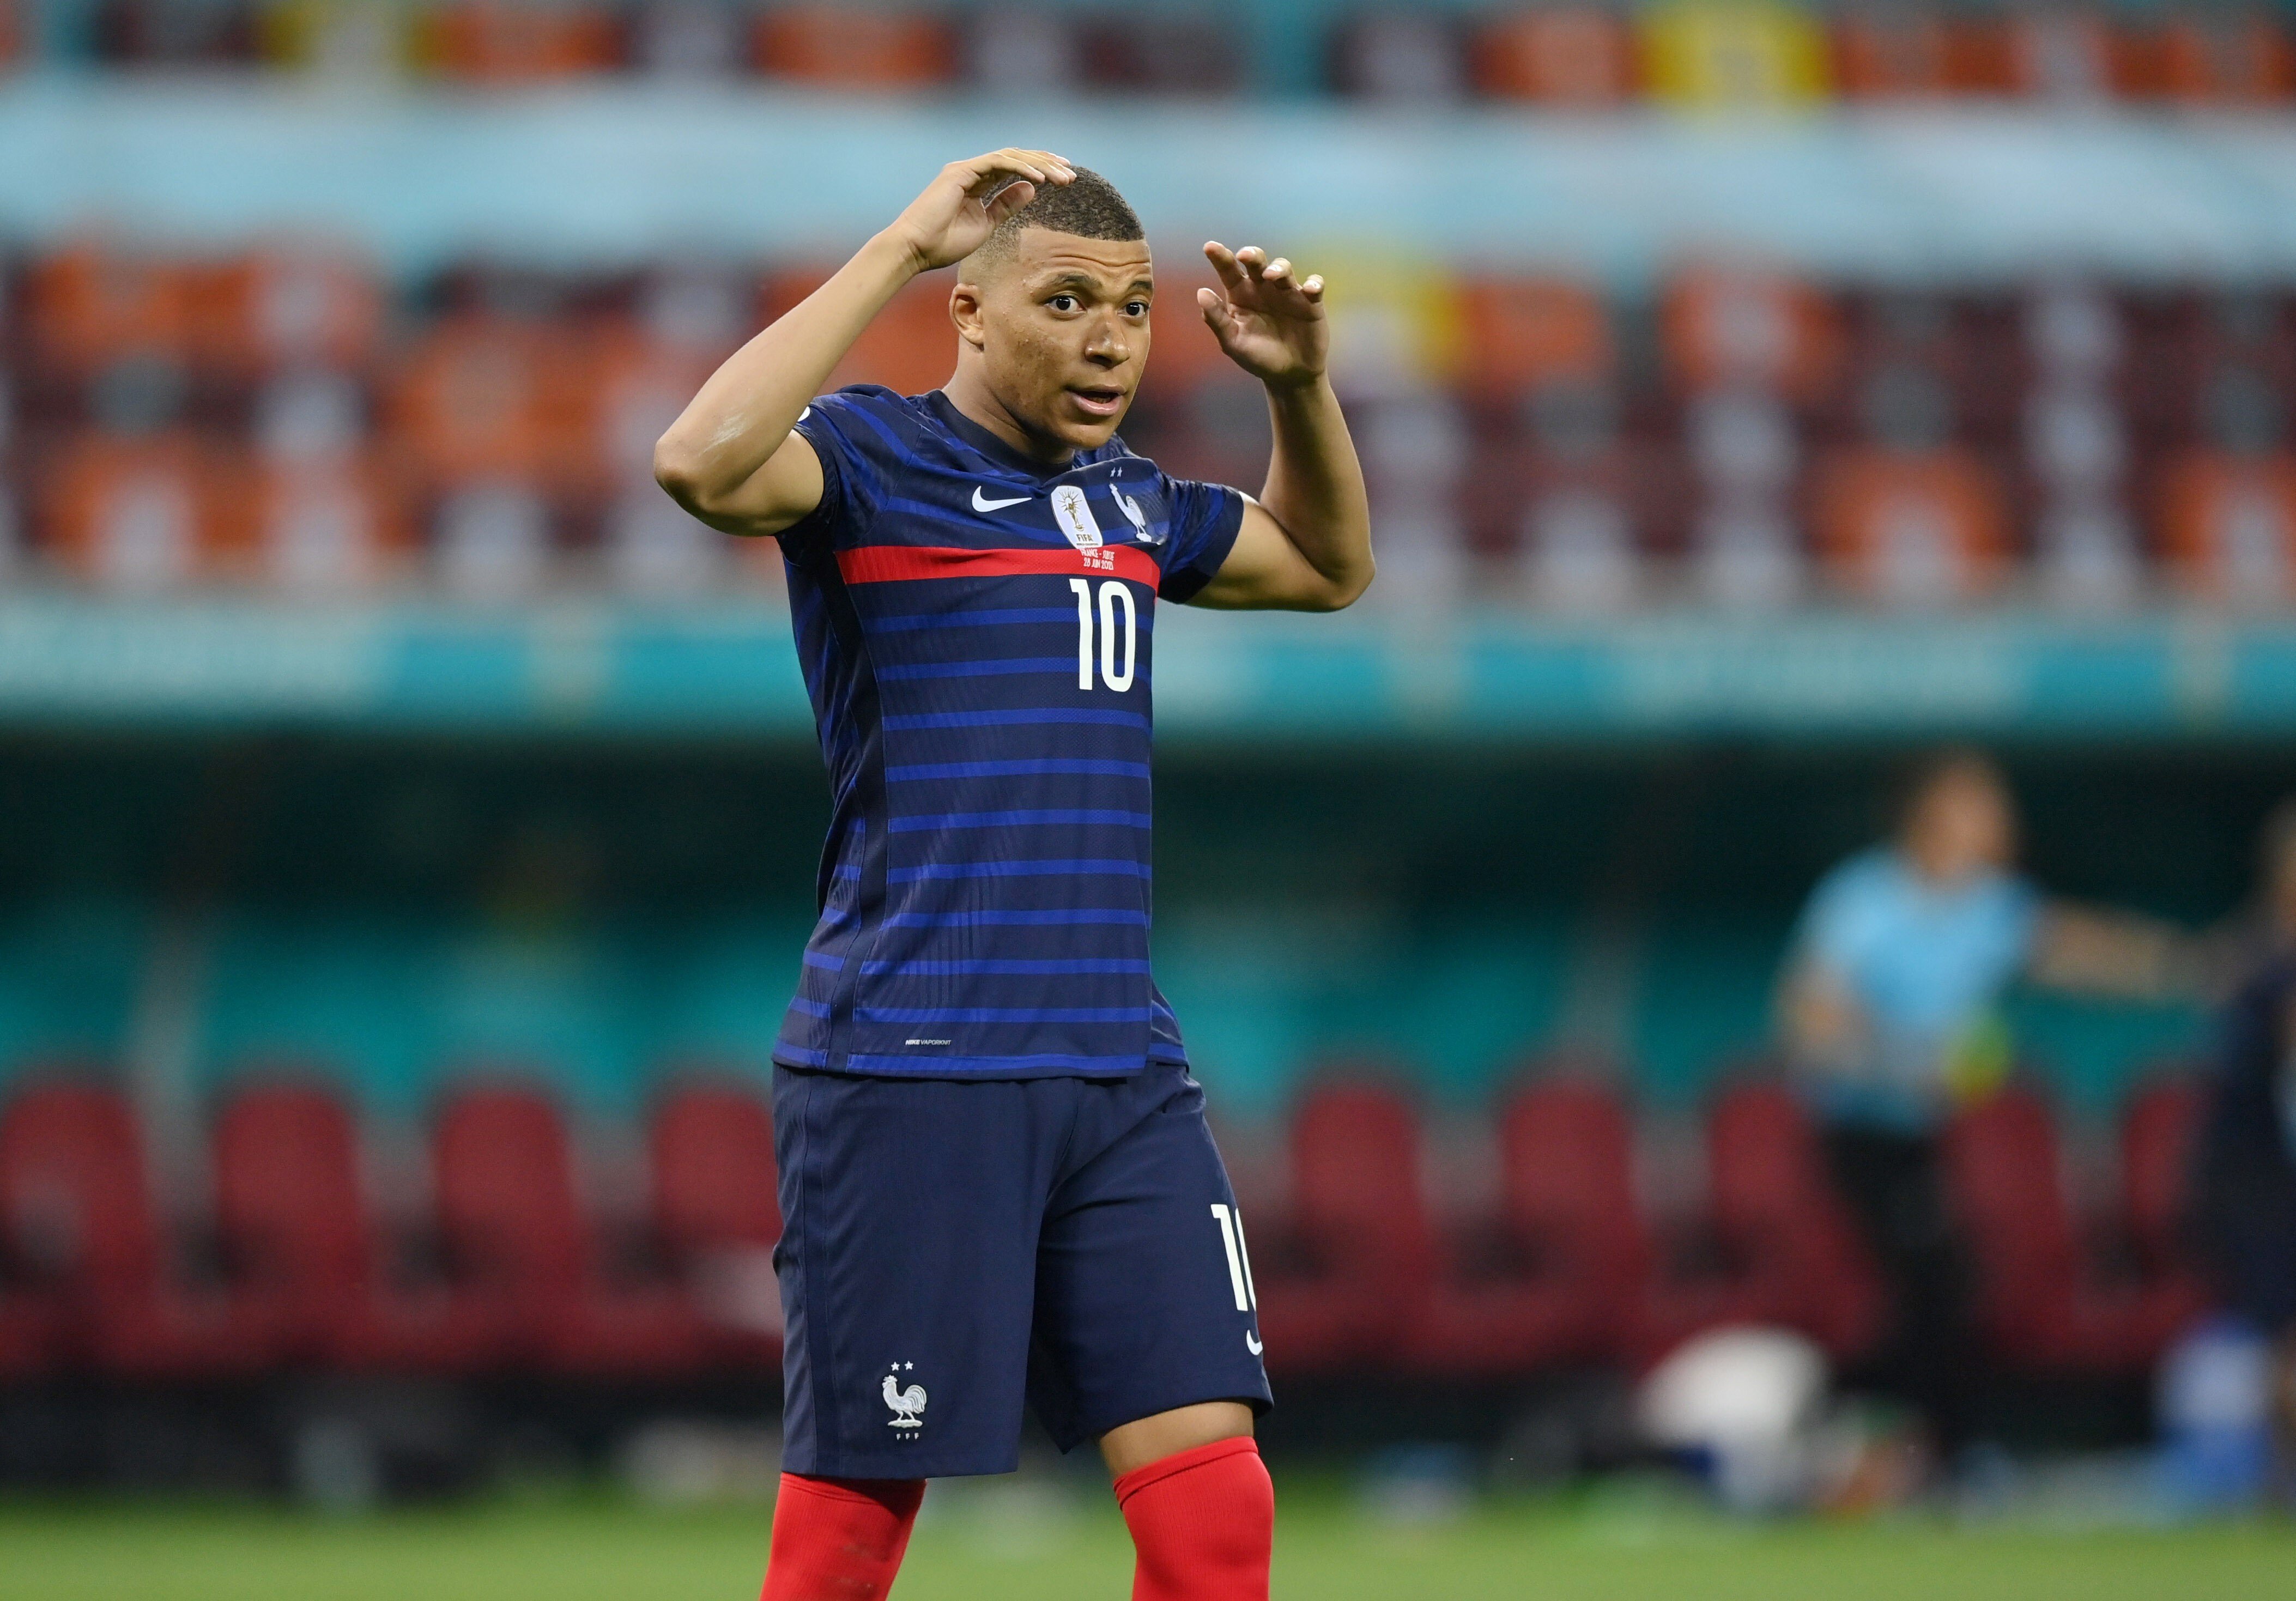 Kylian Mbappe reacts after his decisive spotkick is saved in a penalty shoot-out loss to Switzerland at Euro 2020. Photo: Reuters